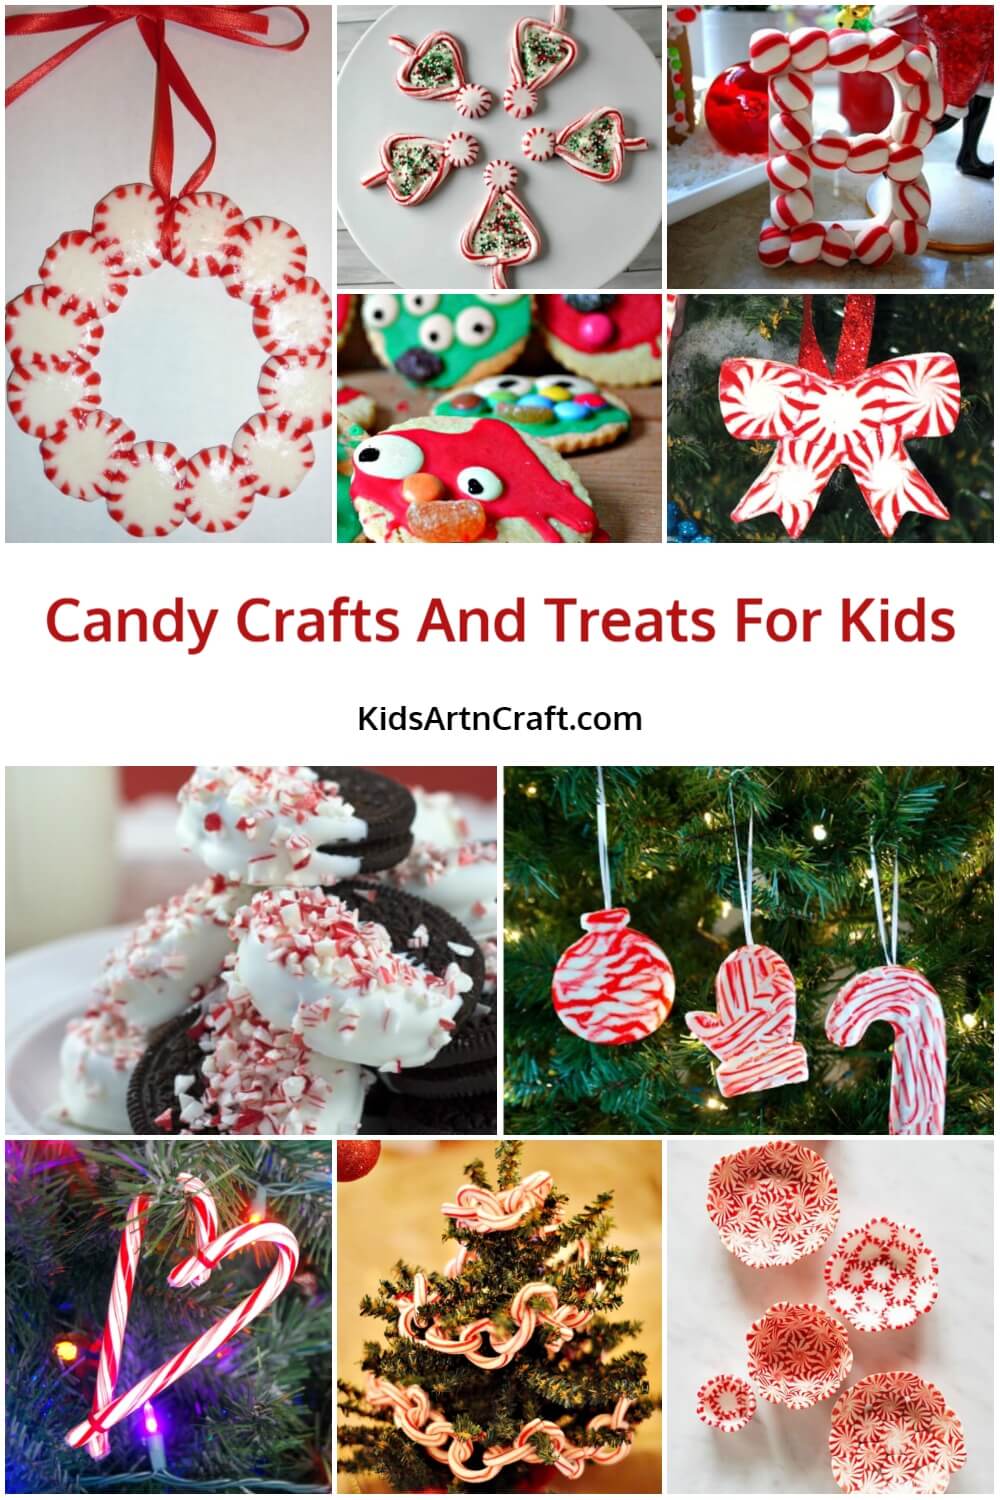 Candy Crafts And Treats For Kids